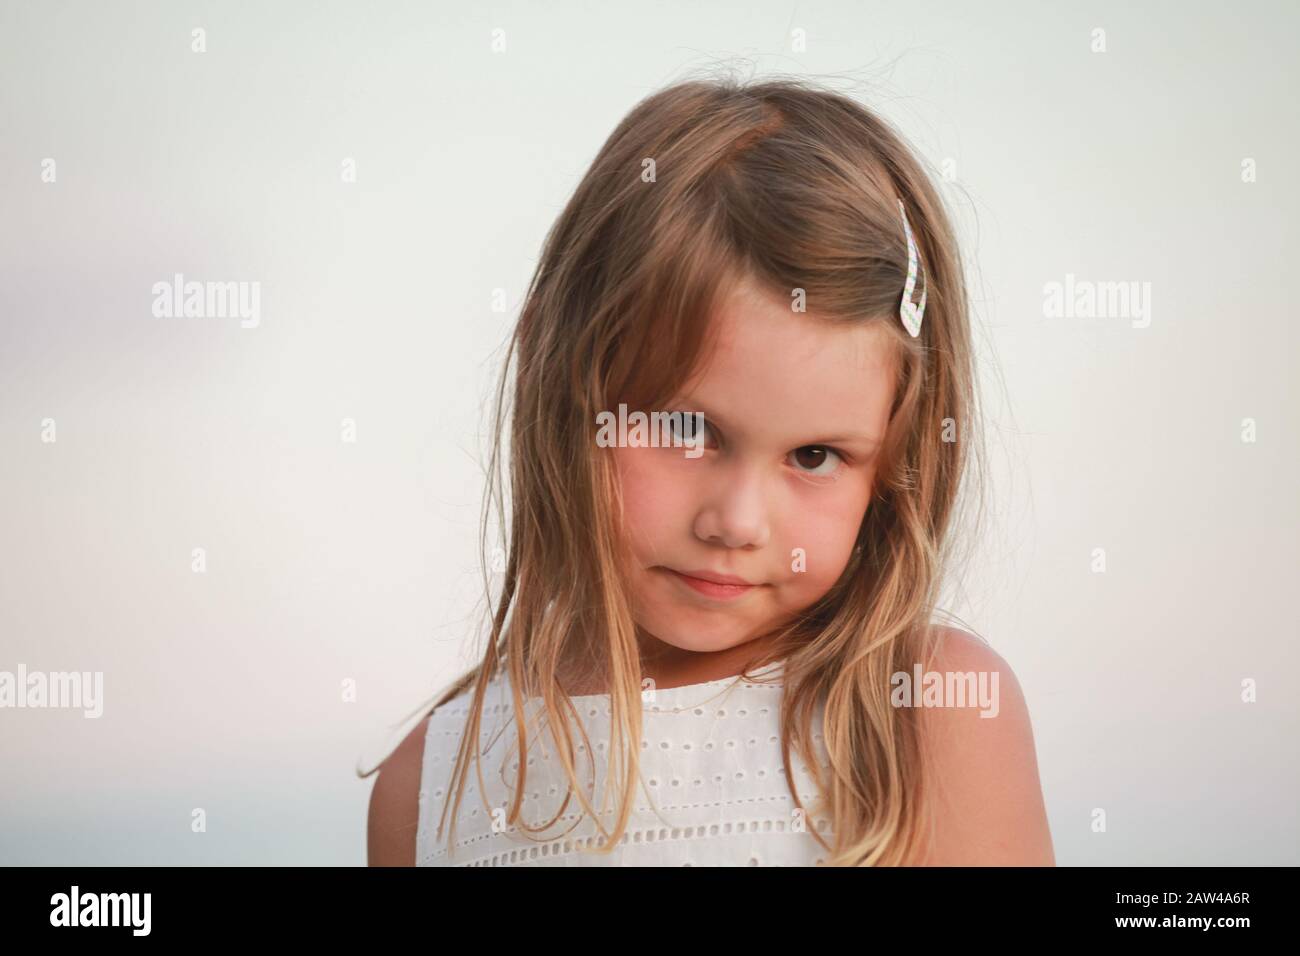 Serious blond little girl in white dress, close-up outdoor face portrait Stock Photo